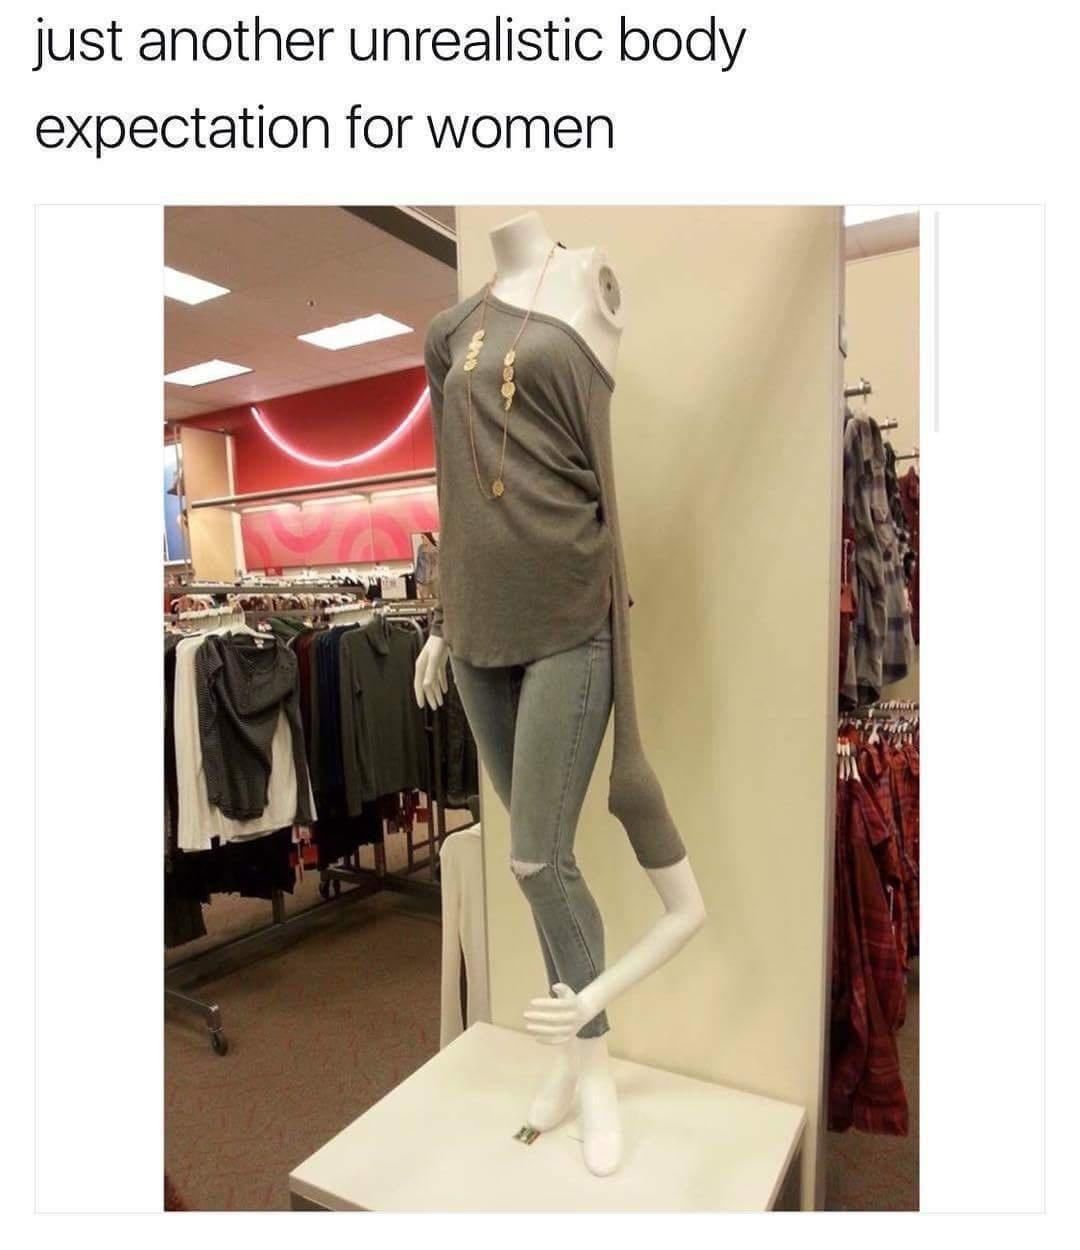 Just another unrealistic body expectation for women.